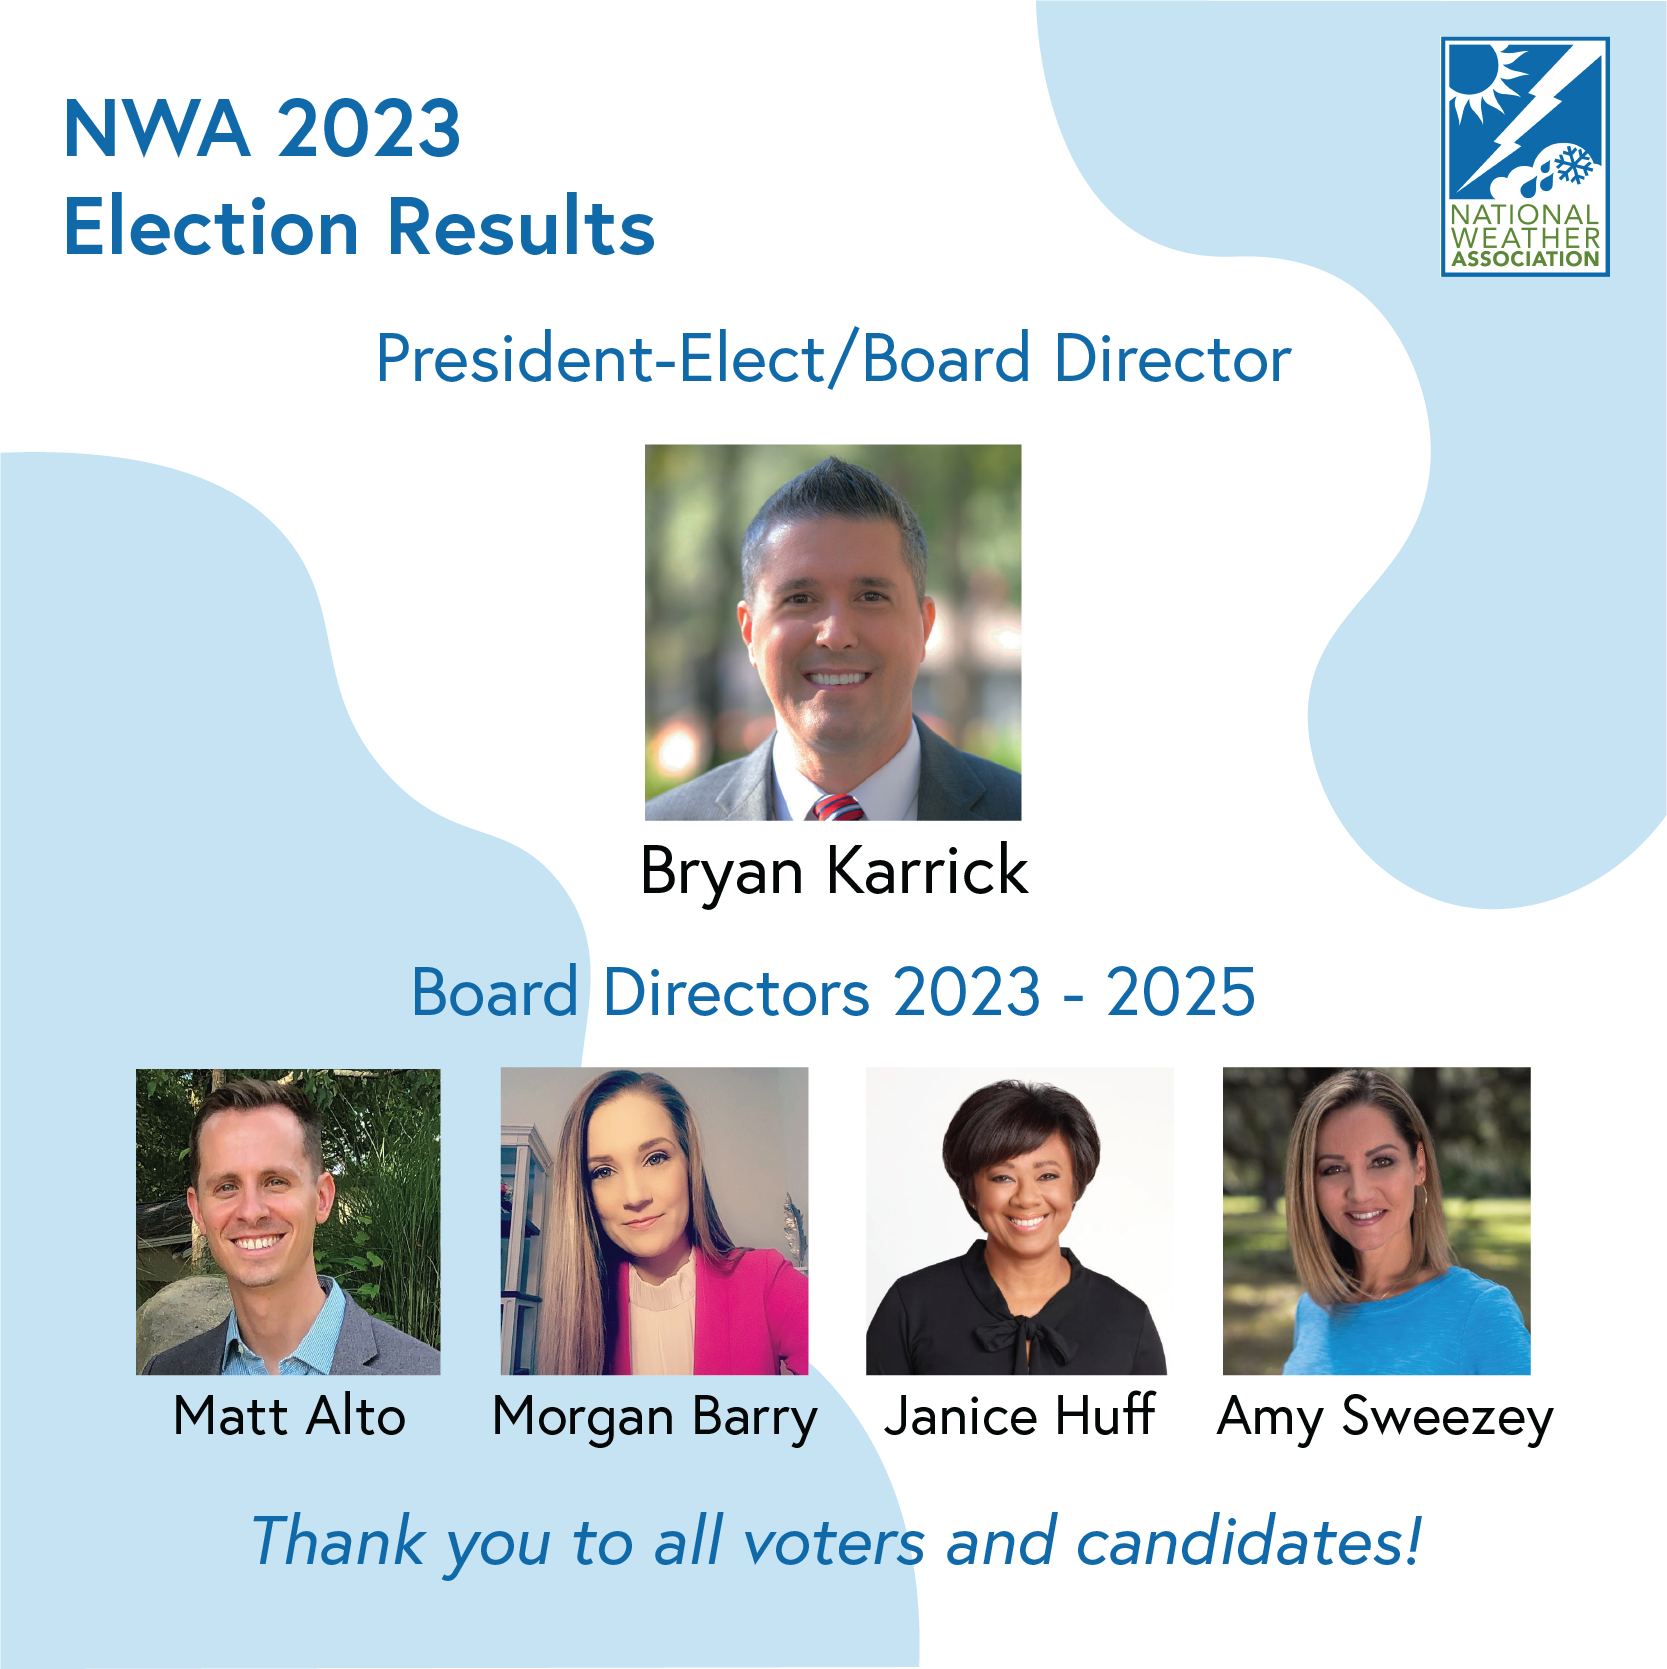 Bryan Karrick is the 2023 President-Elect. He will serve as president in 2024.  Janice Huff, Amy Sweezey, Morgan Barry and Matt Alto will serve as directors for the years of 2023 through 2025.